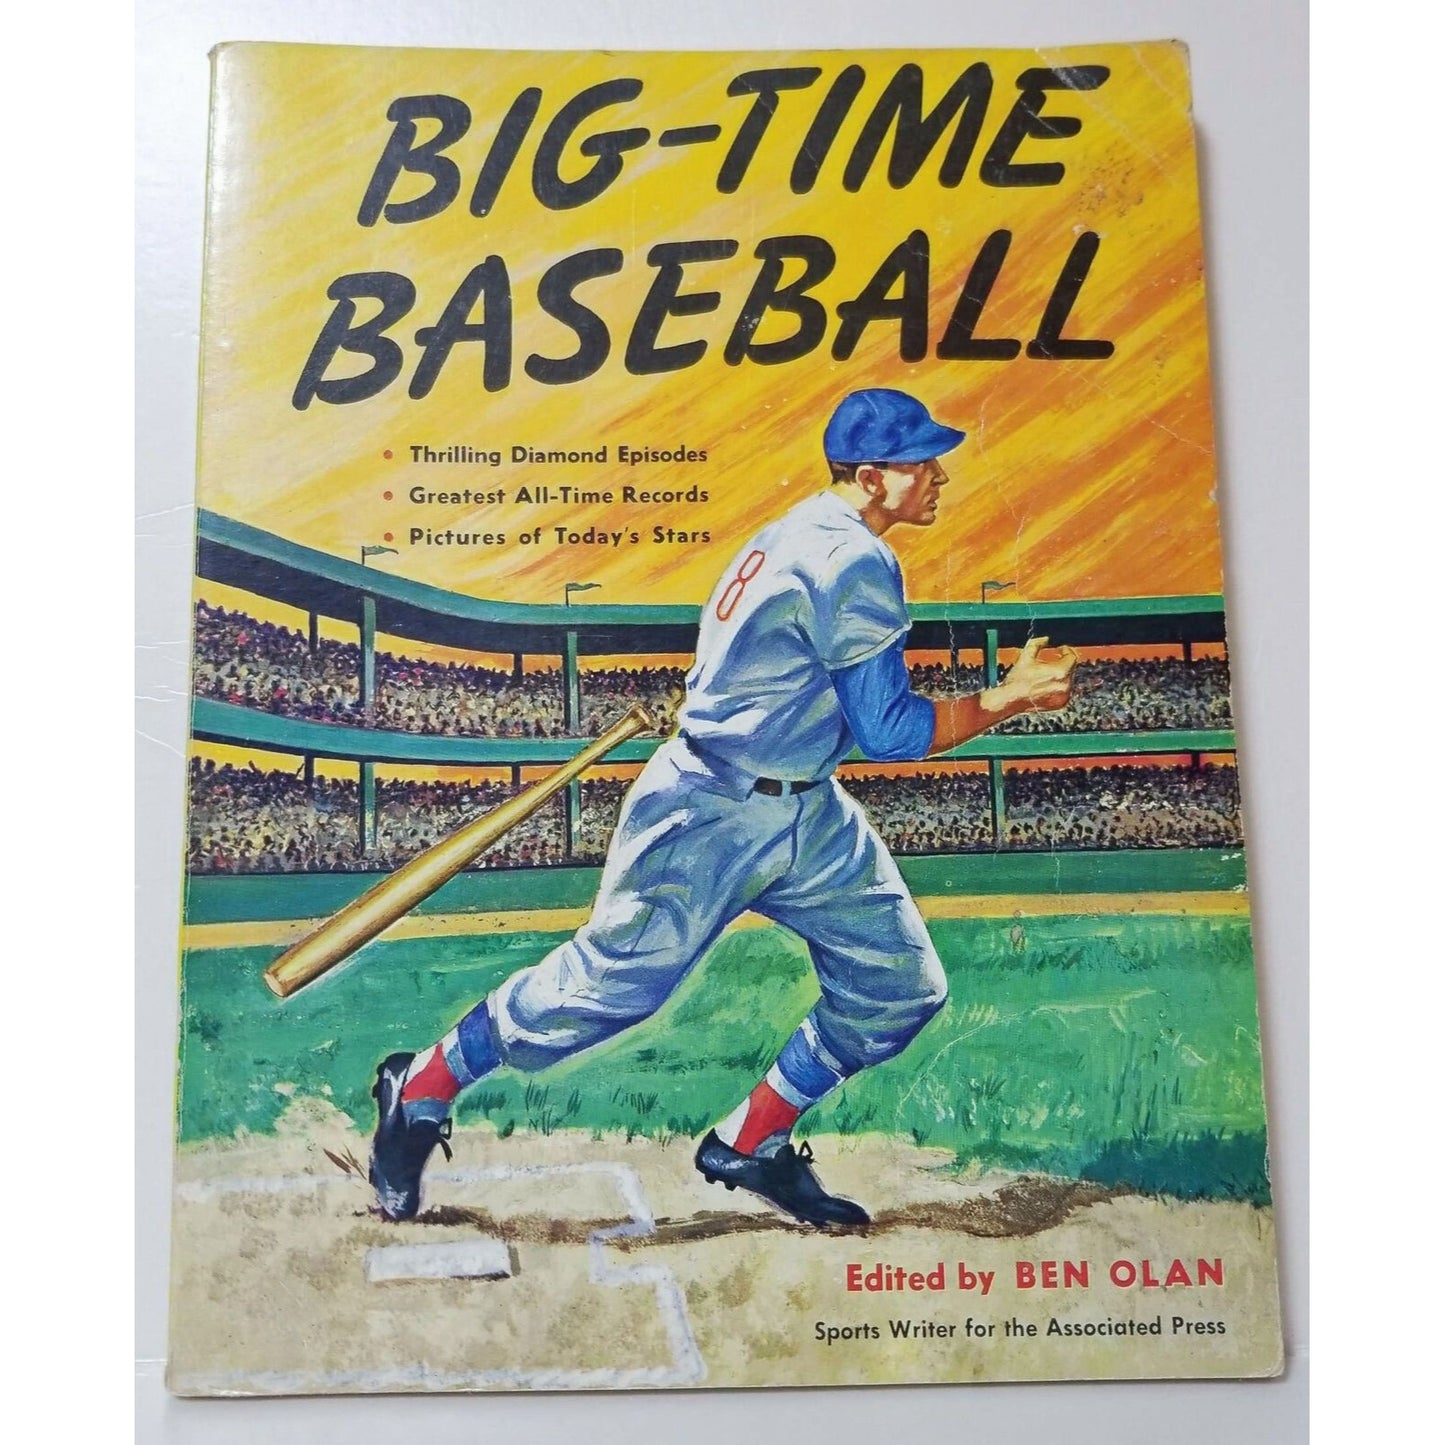 1961 BIG-TIME BASEBALL PAPER Book CLASSIC BY BEN OLAN M Babe Ruth Aaron - Mays